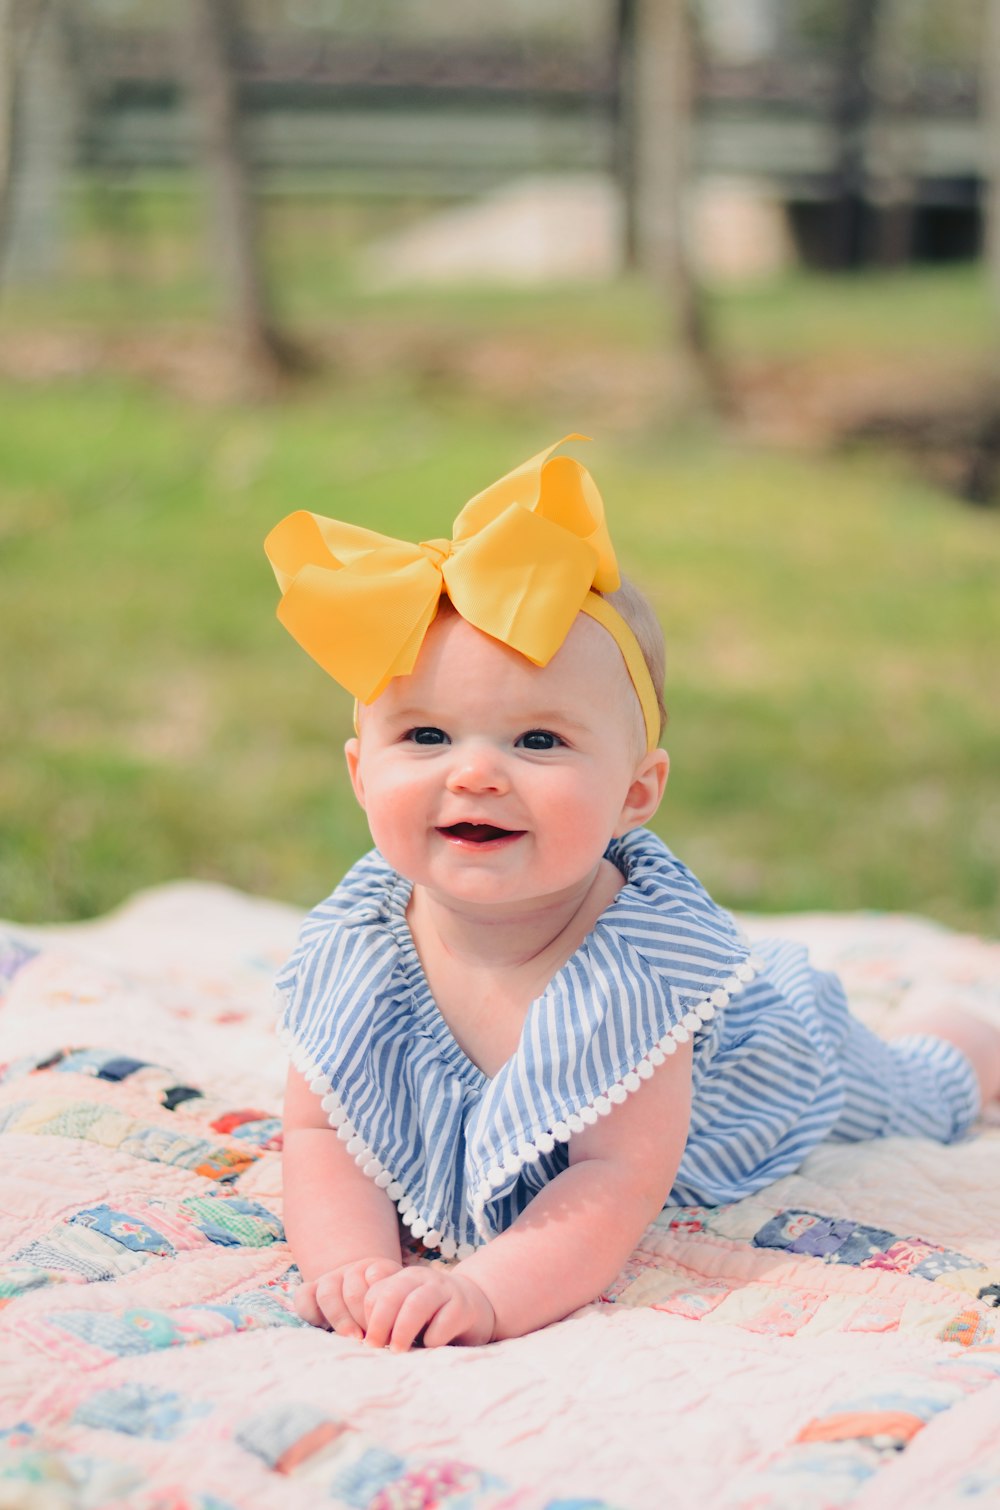 500+ Babies Pictures [HD] | Download Free Images & Stock Photos on